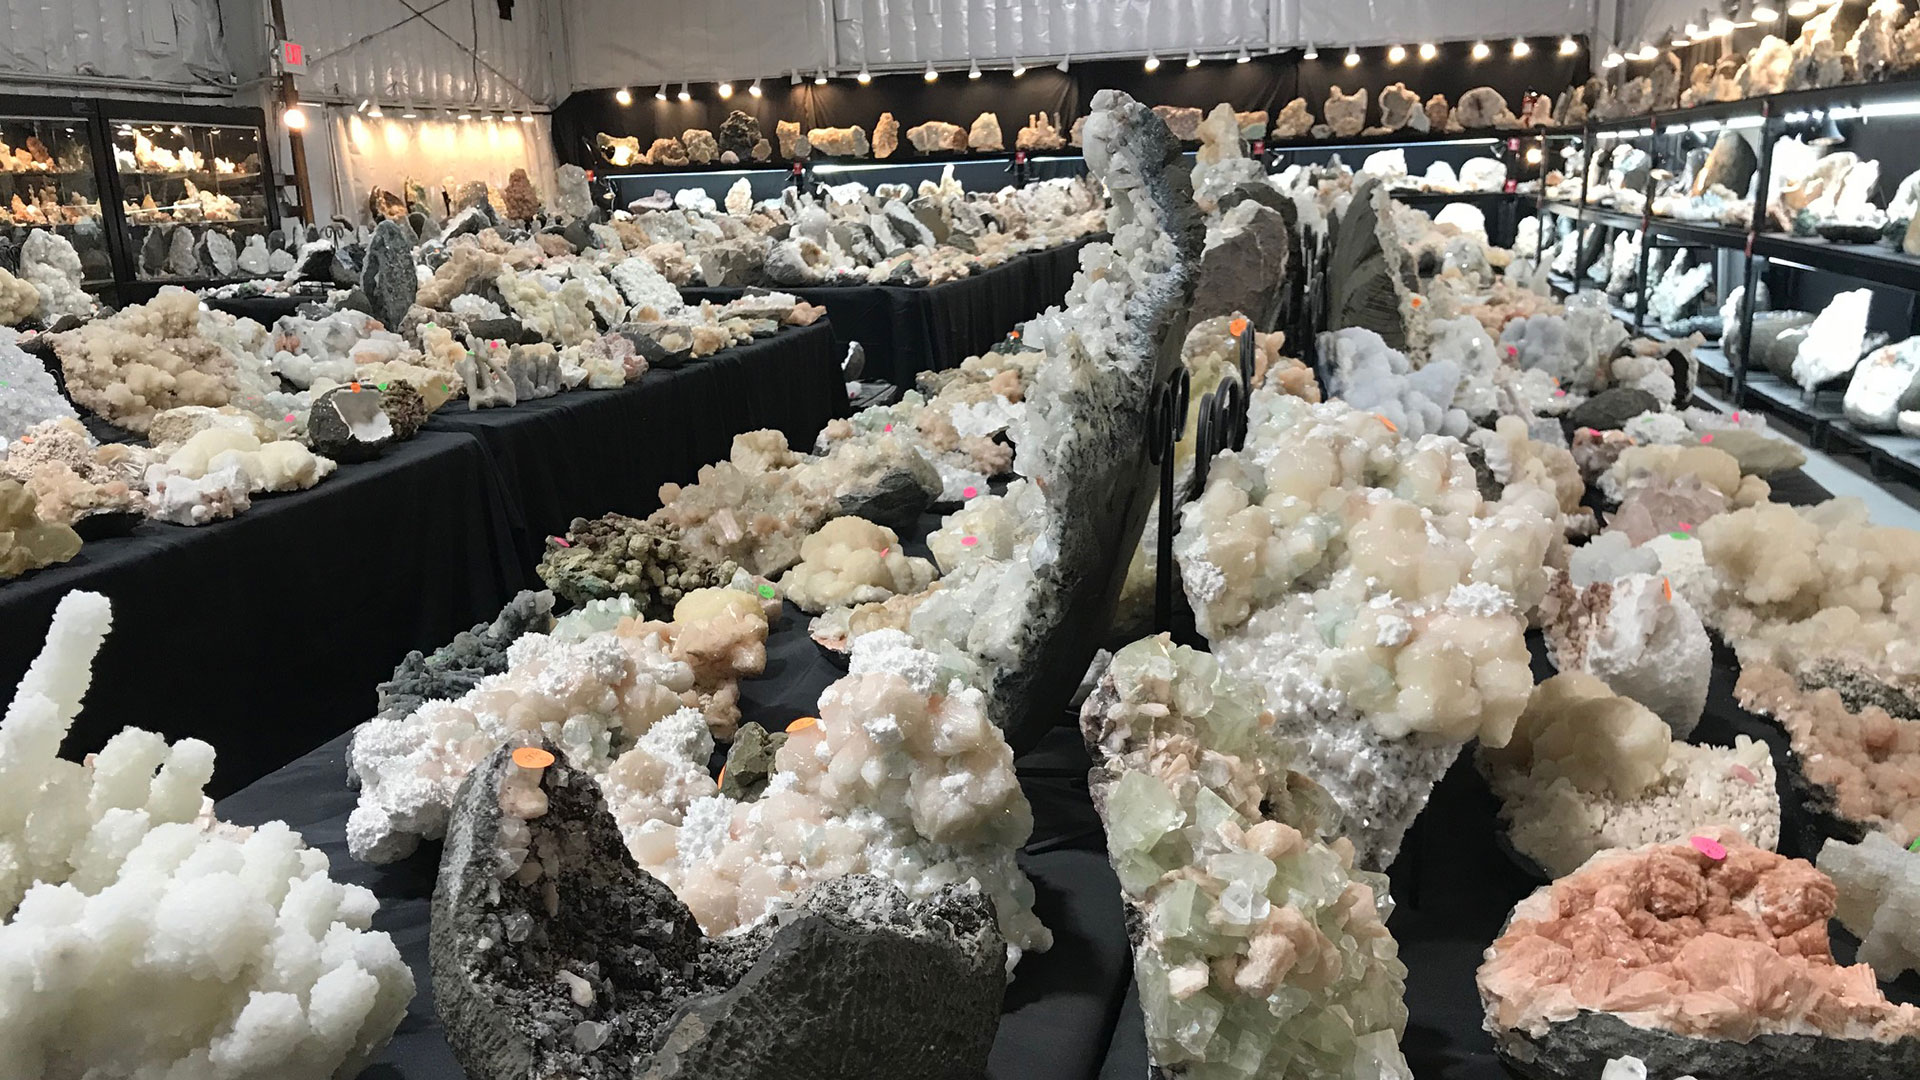 Superb Minerals imports its items from India and leases a 12,000 square foot warehouse in Tucson where they can be stored and sold.  The Tucson Gem, Mineral and Fossil Showcase, a vital annual event, was cancelled in 2021 due to the pandemic. 